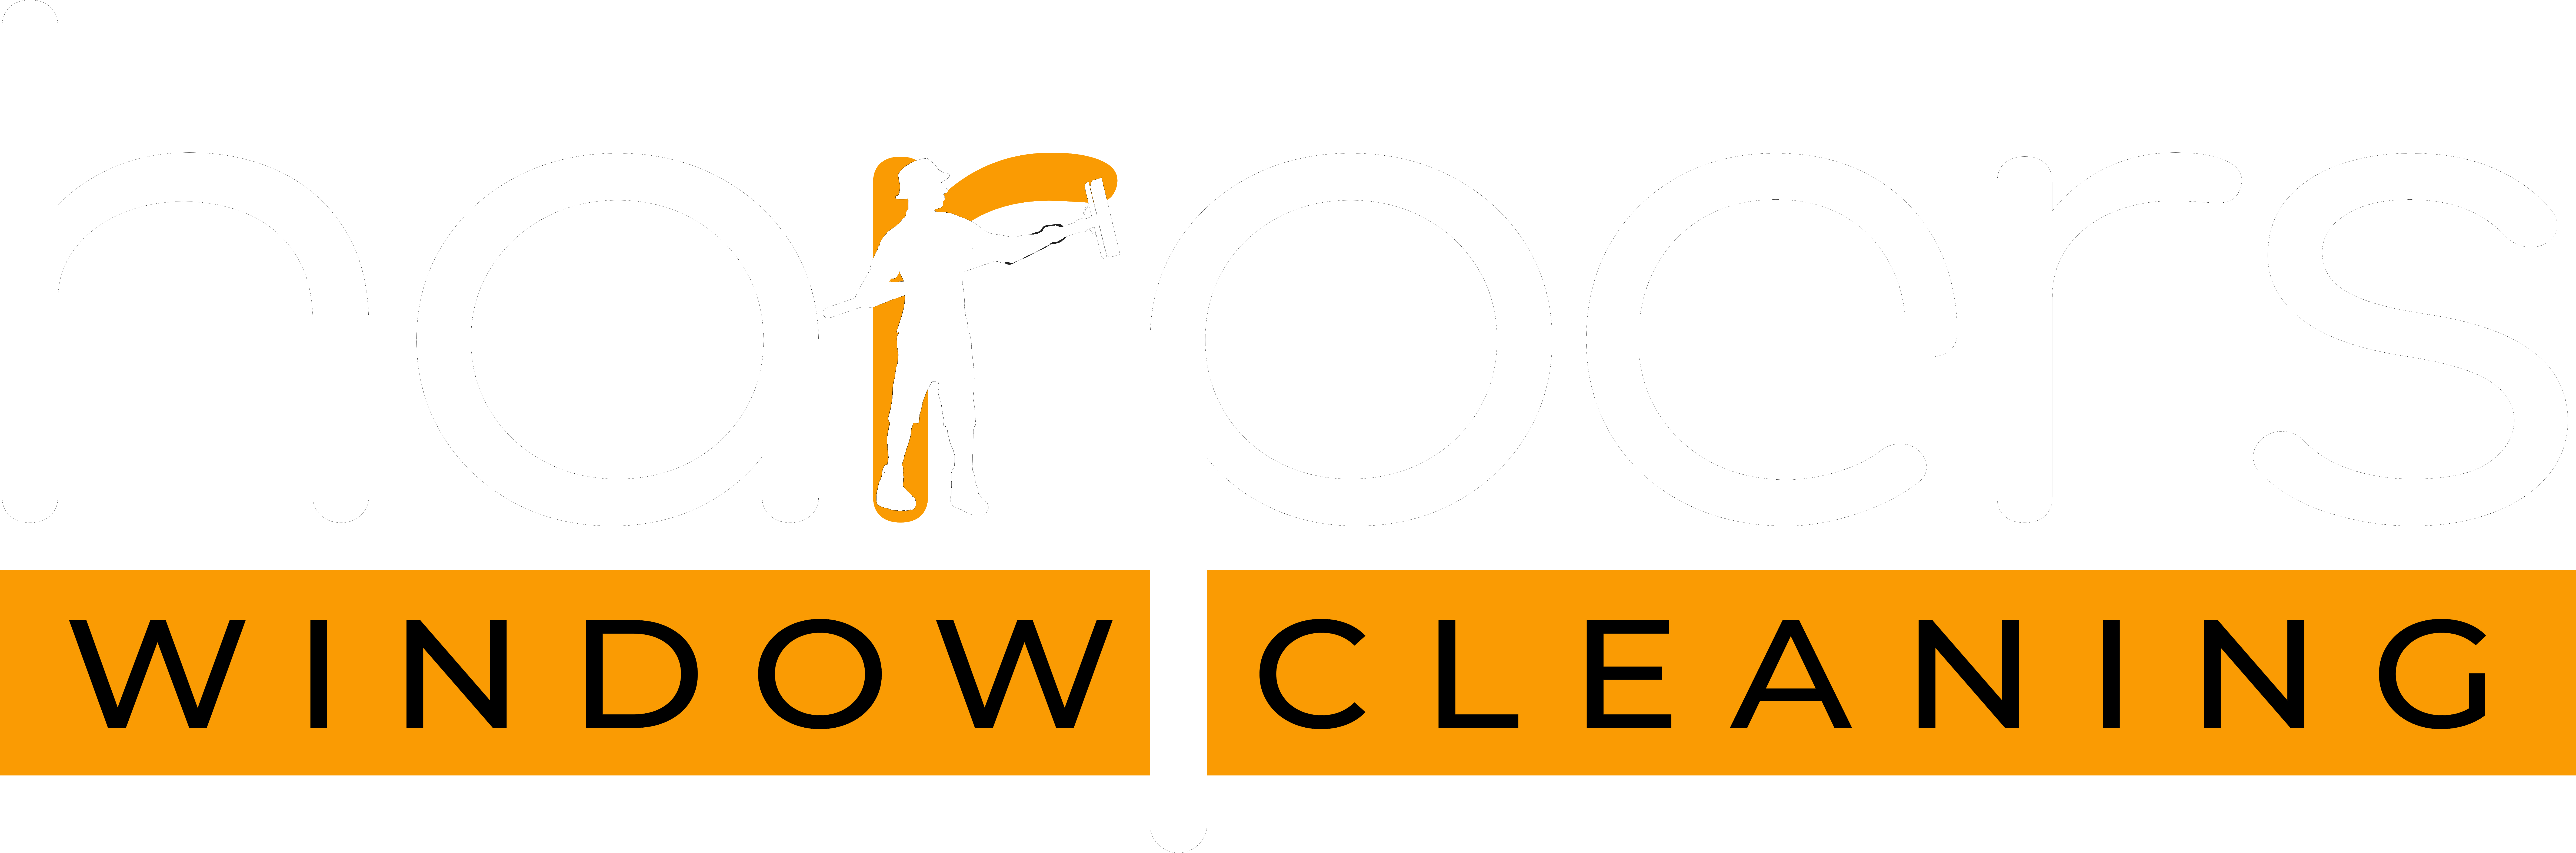 Harpers Window Cleaning – Stretton